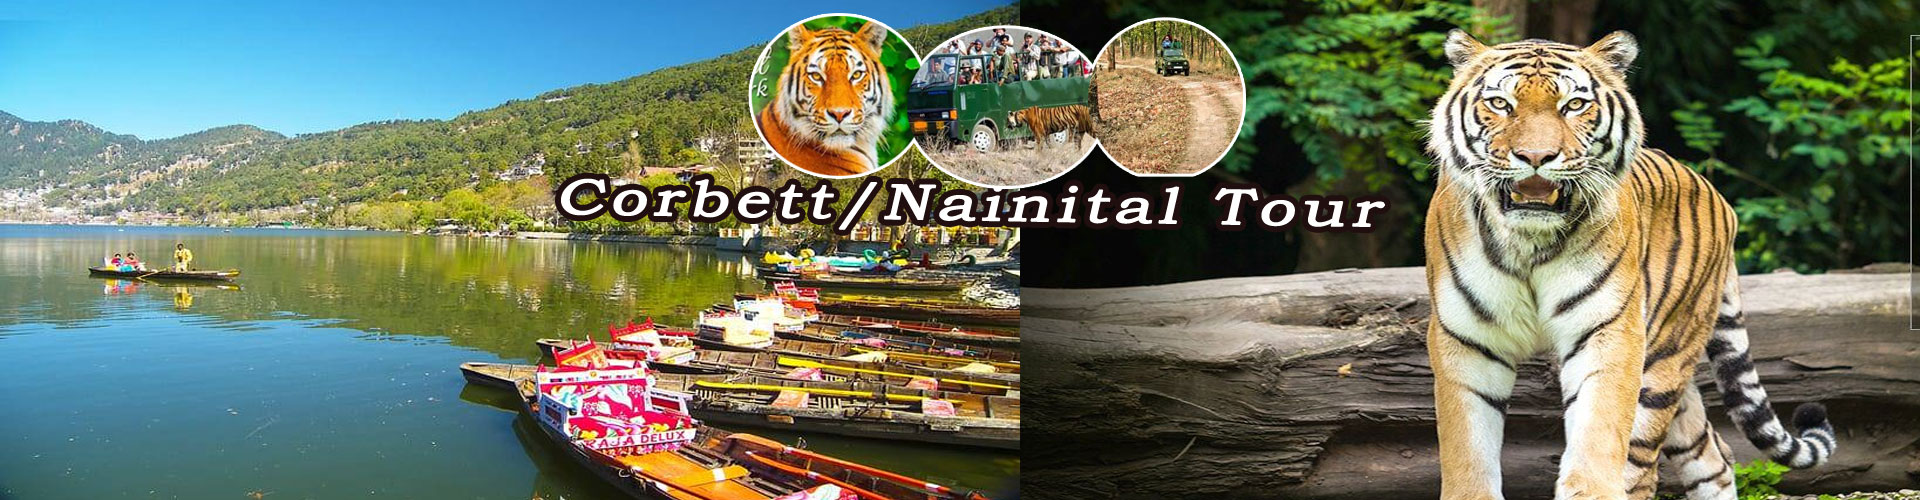 nainital and corbett tour packages